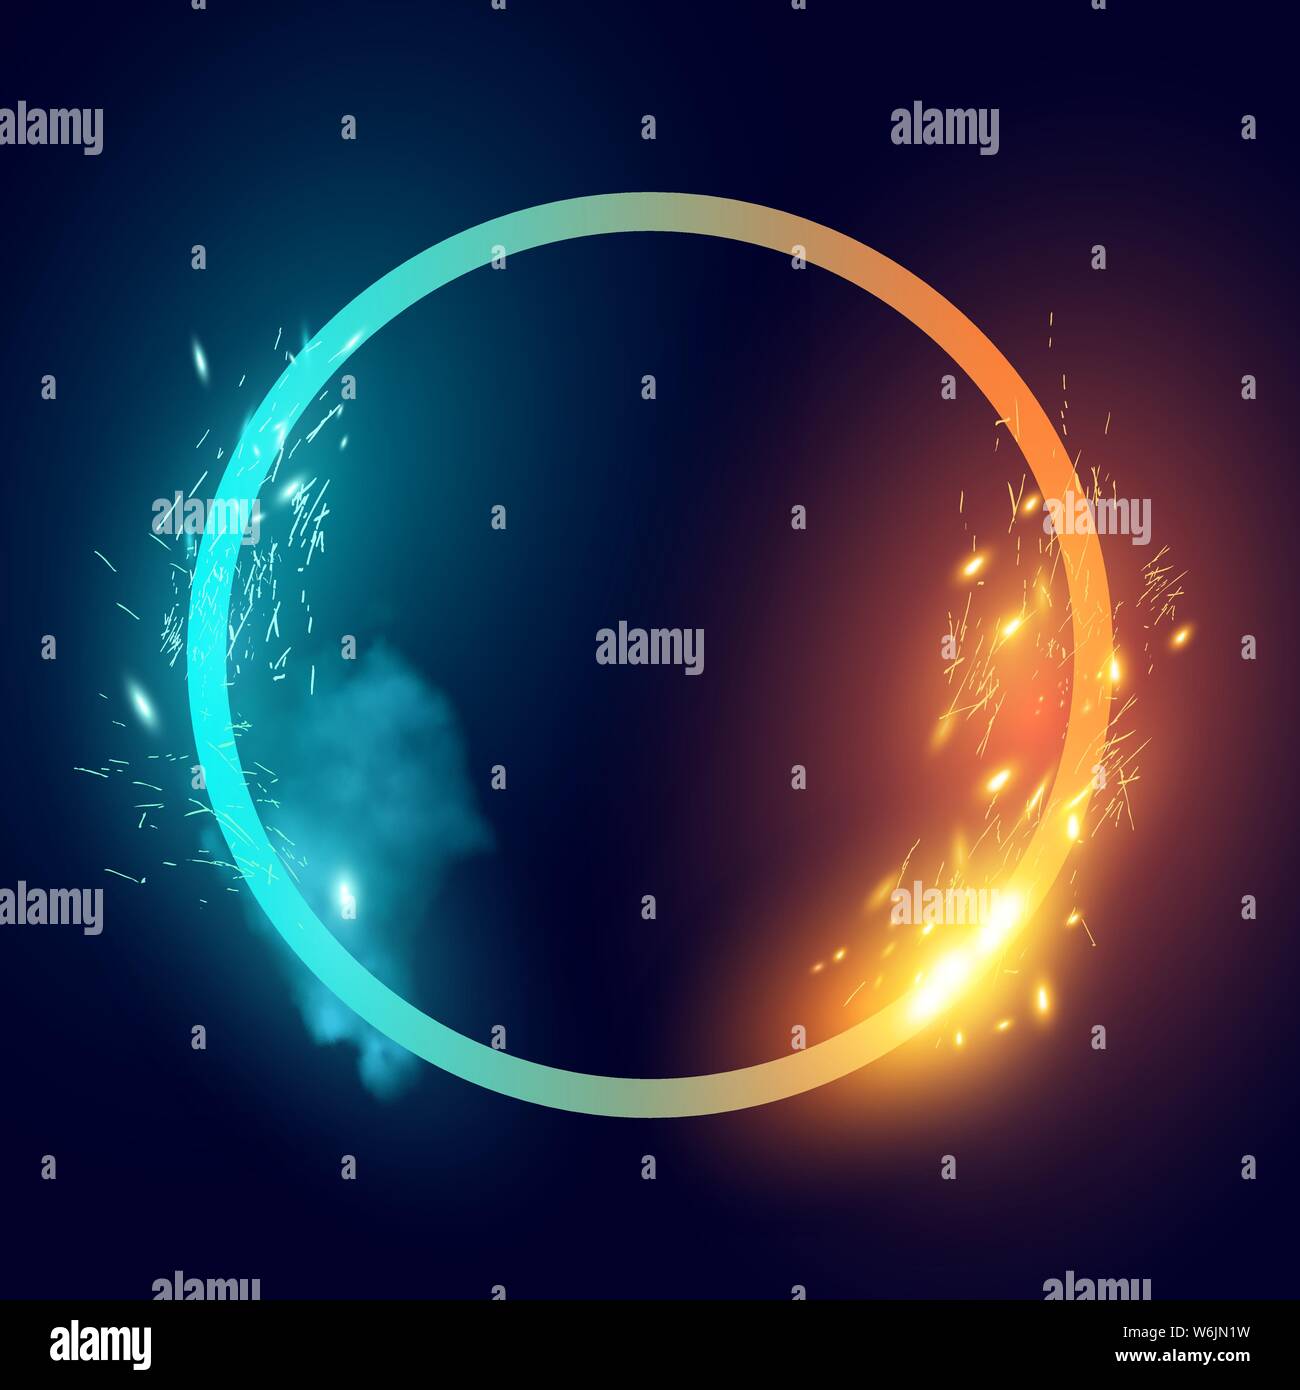 Fire and Ice effects on a loop shape. Vector illustration. Stock Vector